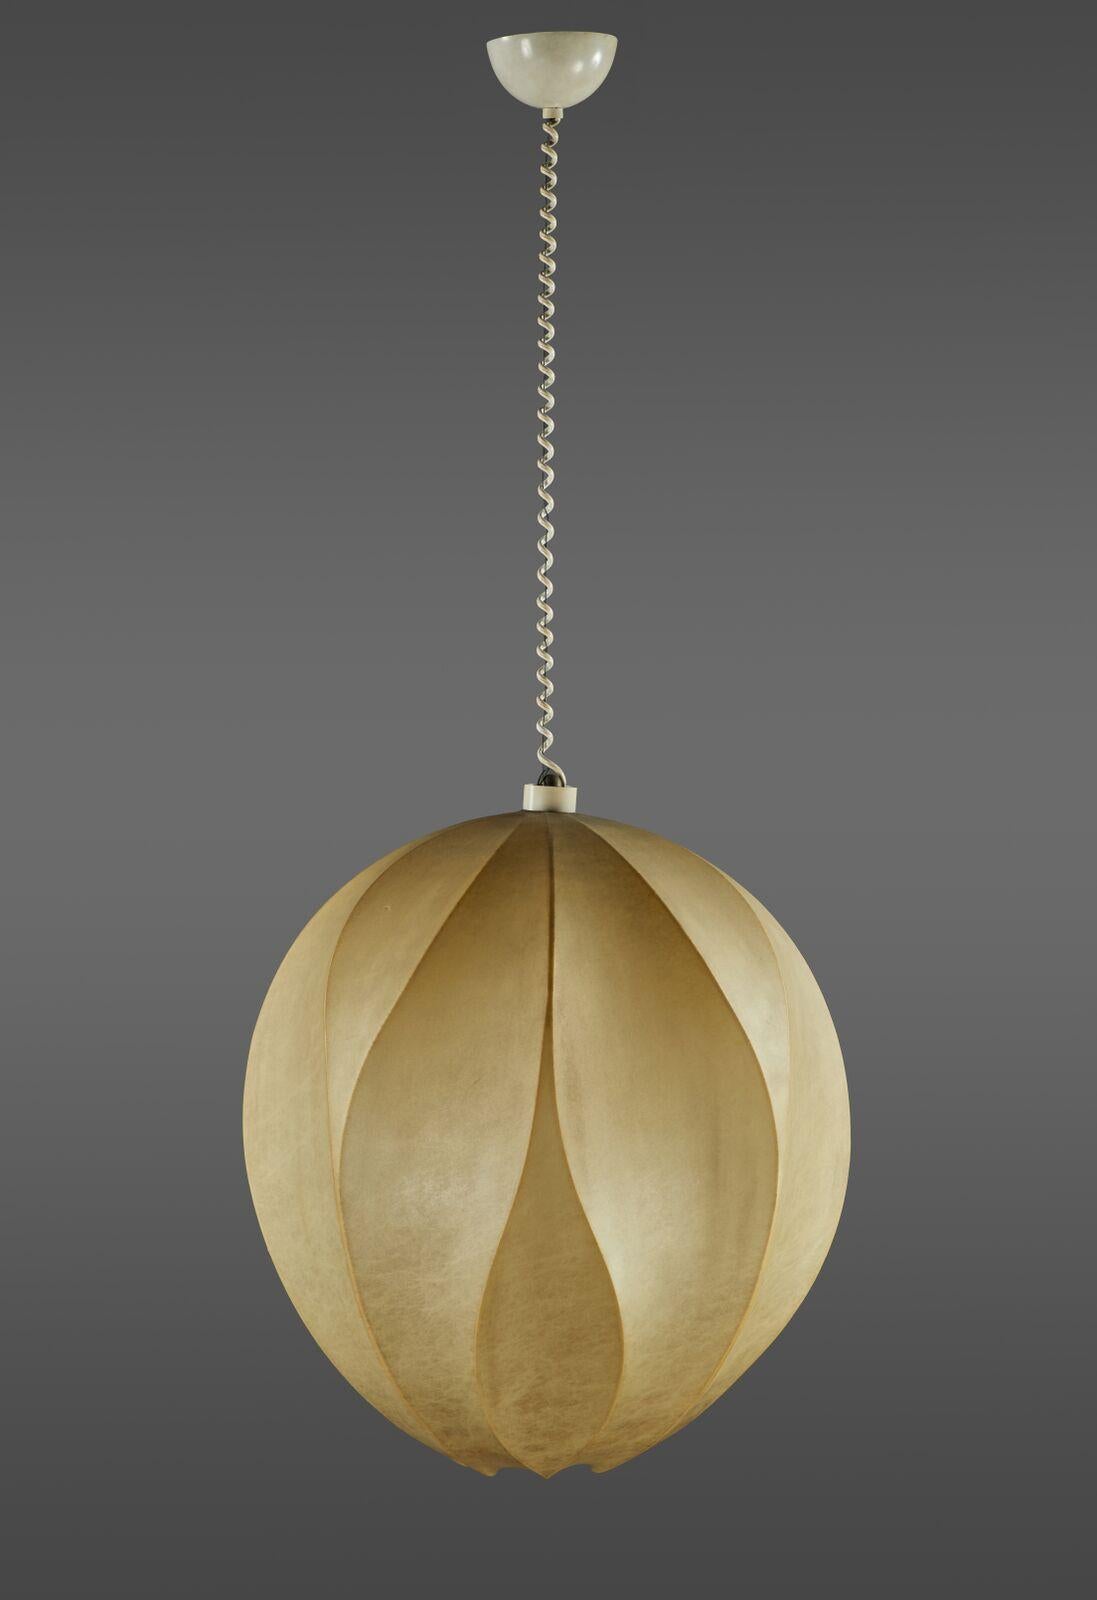 A beautifully sculptural Italian cocoon pendant lamp in the manner of Pier and Achille Giacomo Castiglioni. At 25